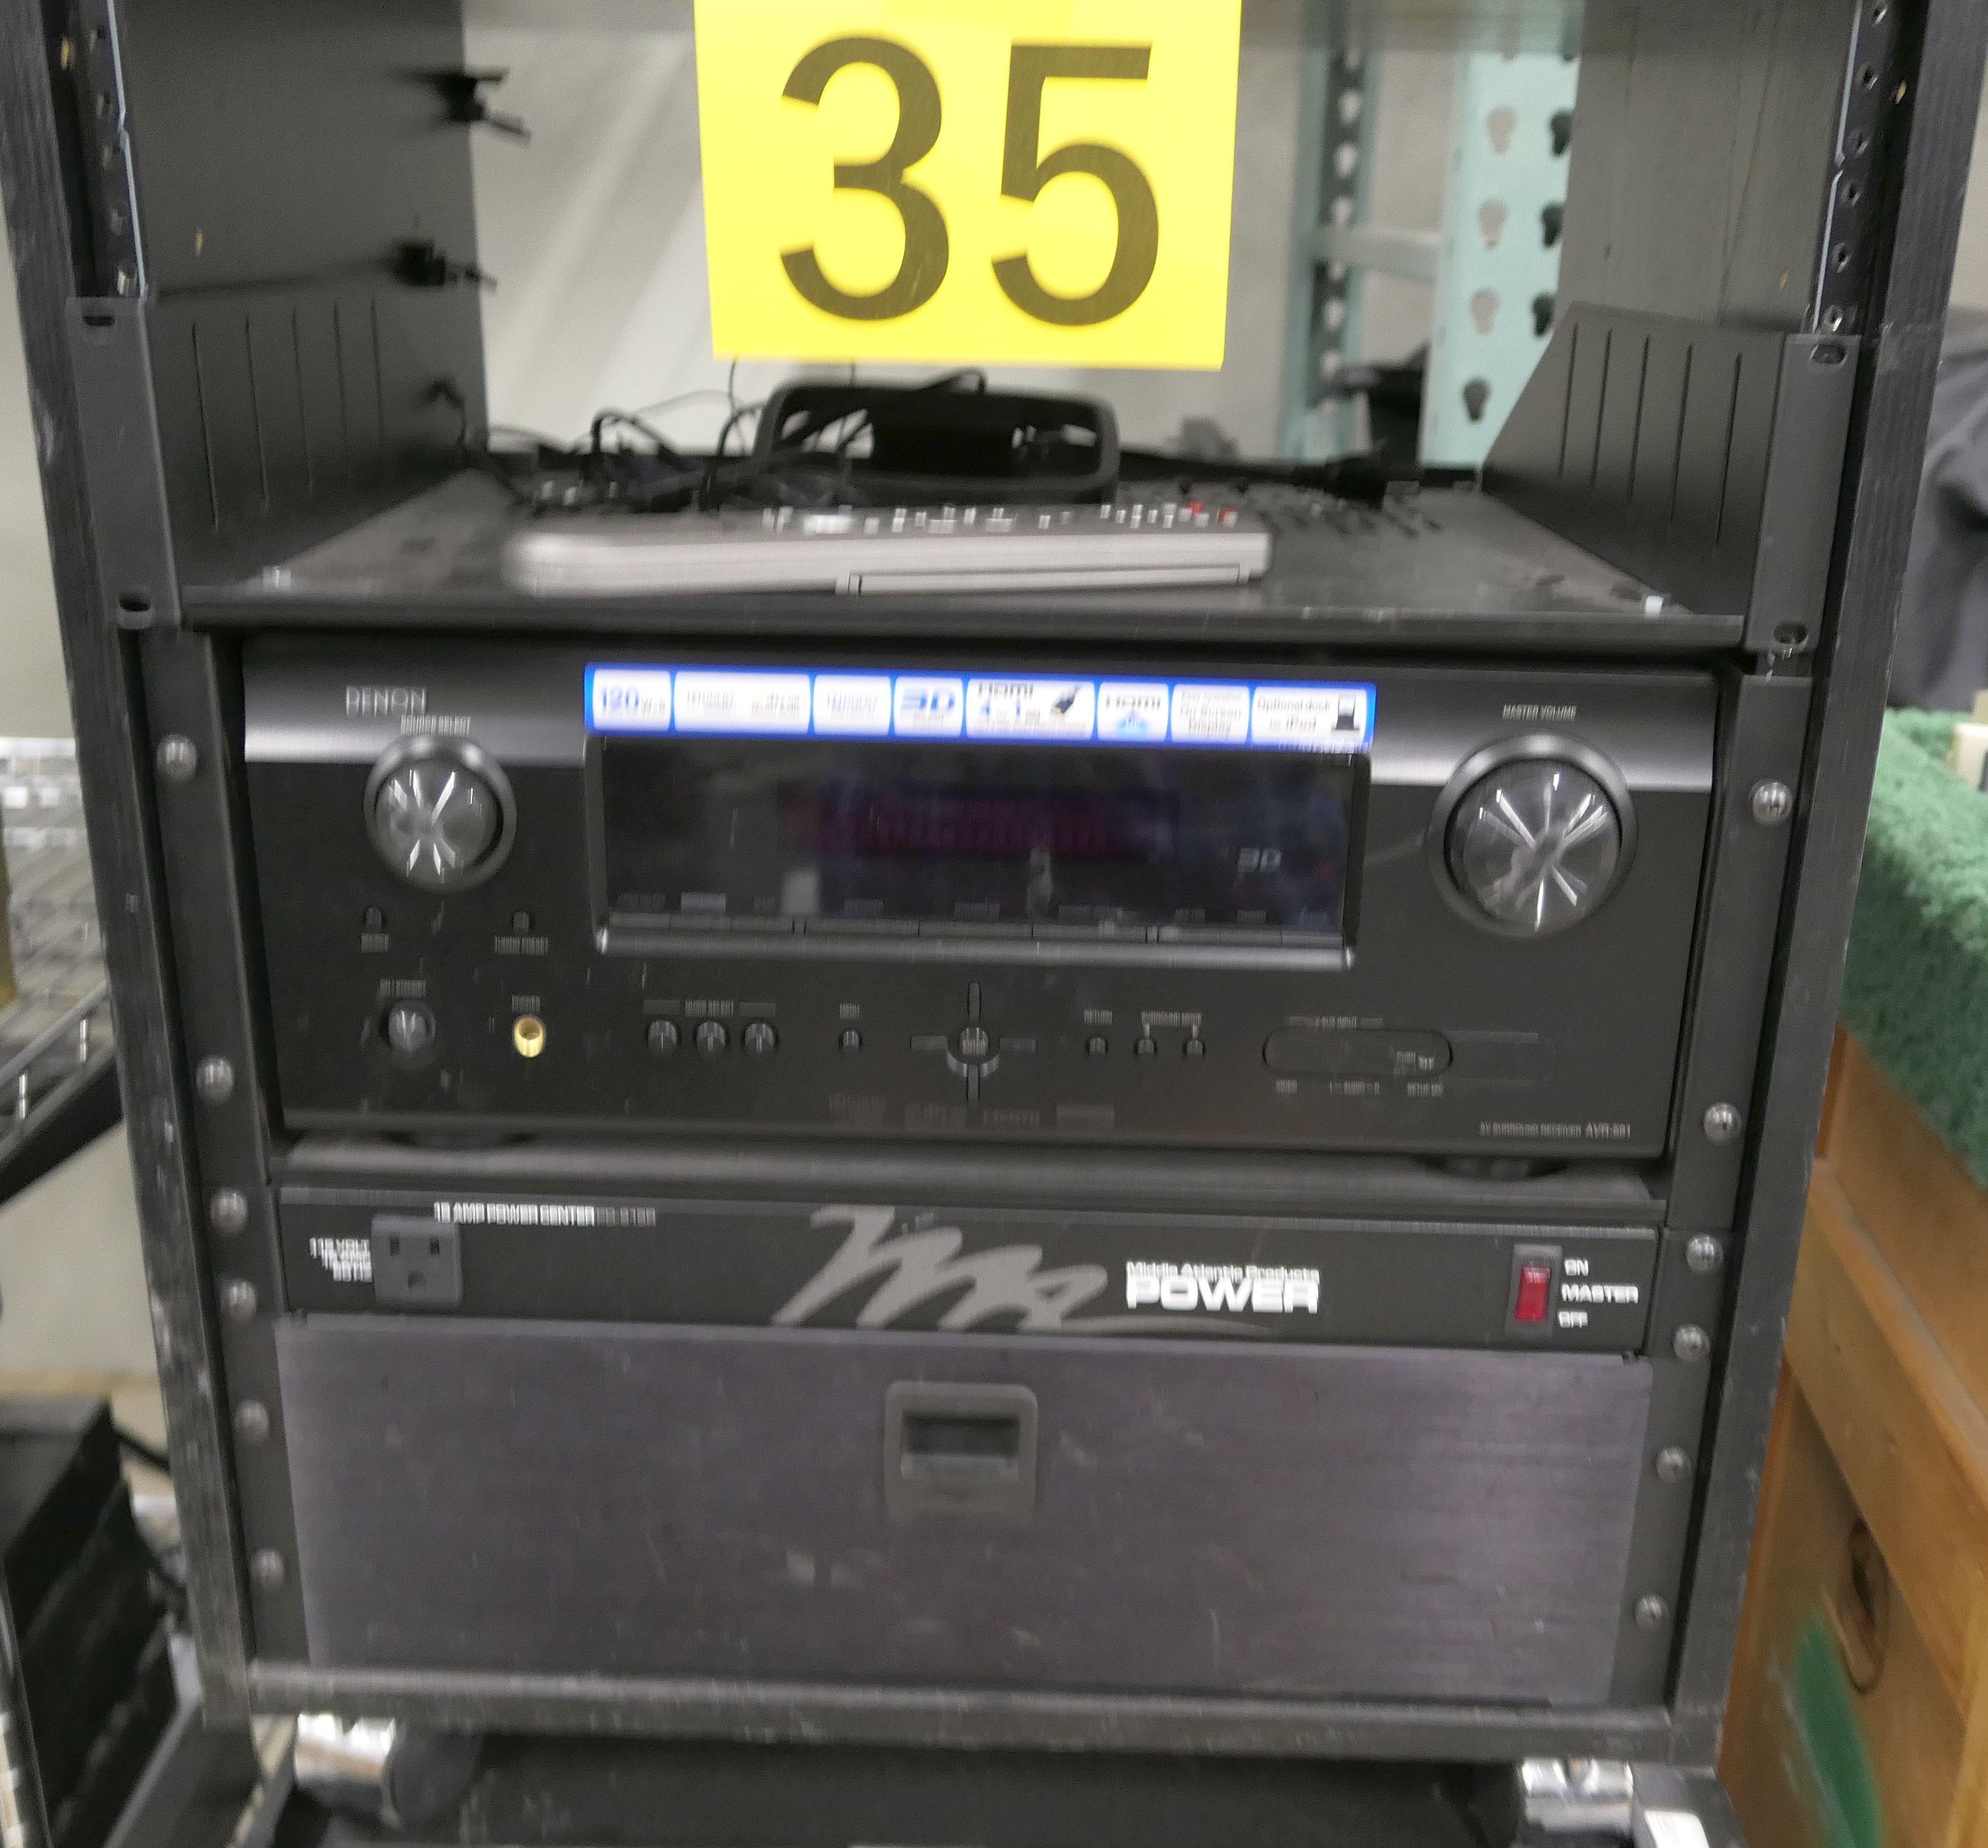 Misc. Audio/Visual Equipment: Items on Cart and 2 Rack Units on Wheels.